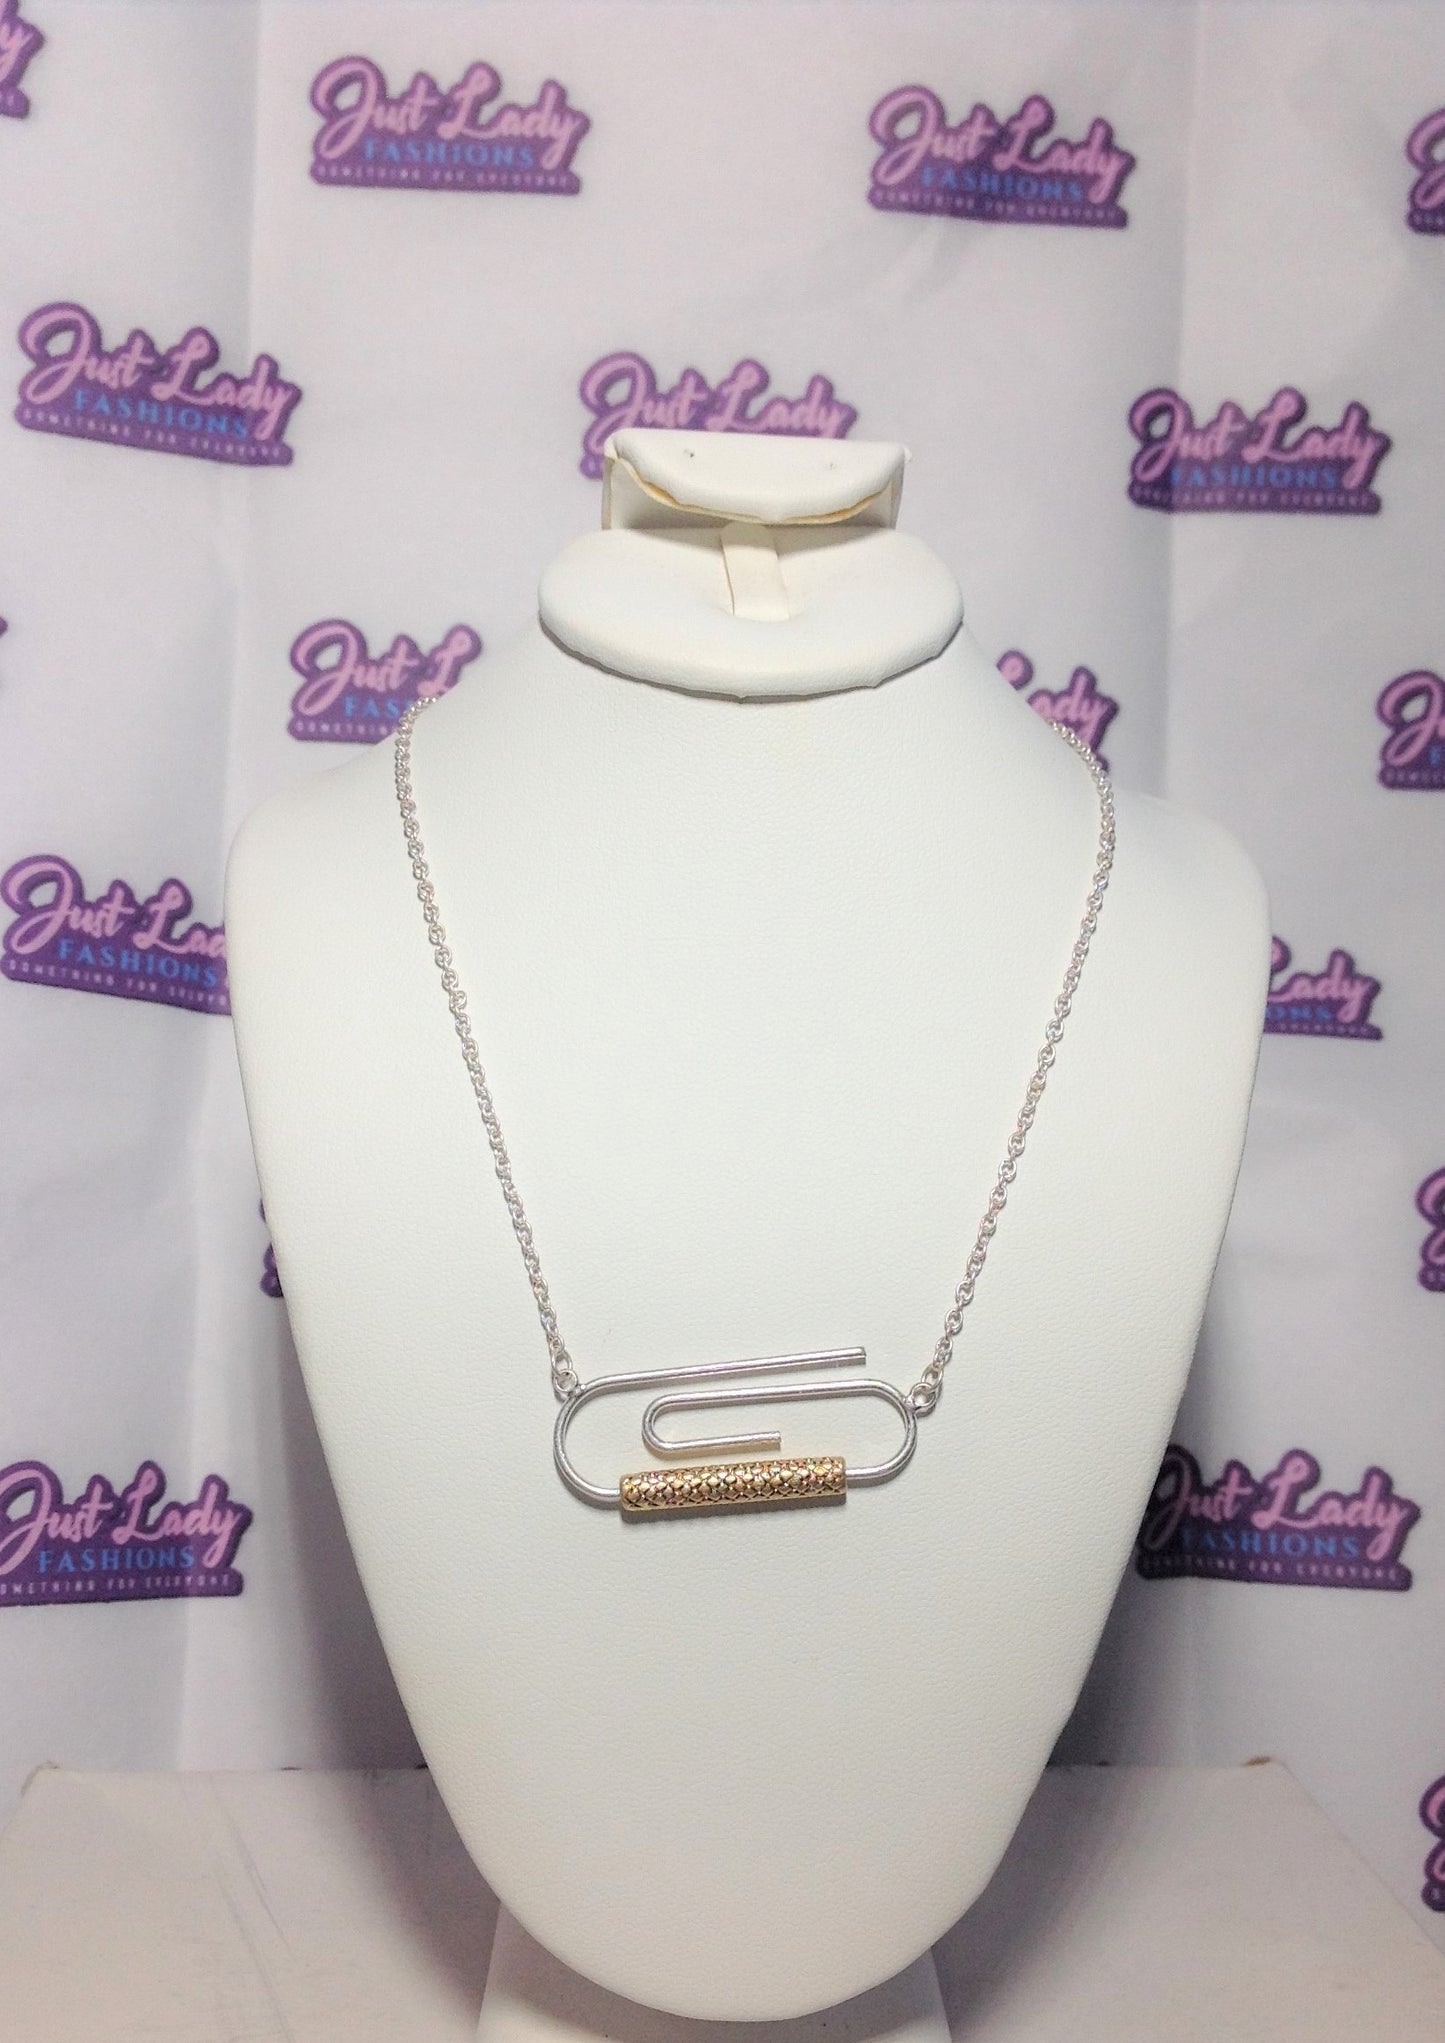 Crazy Paper Clip Costume Jewelry Necklace